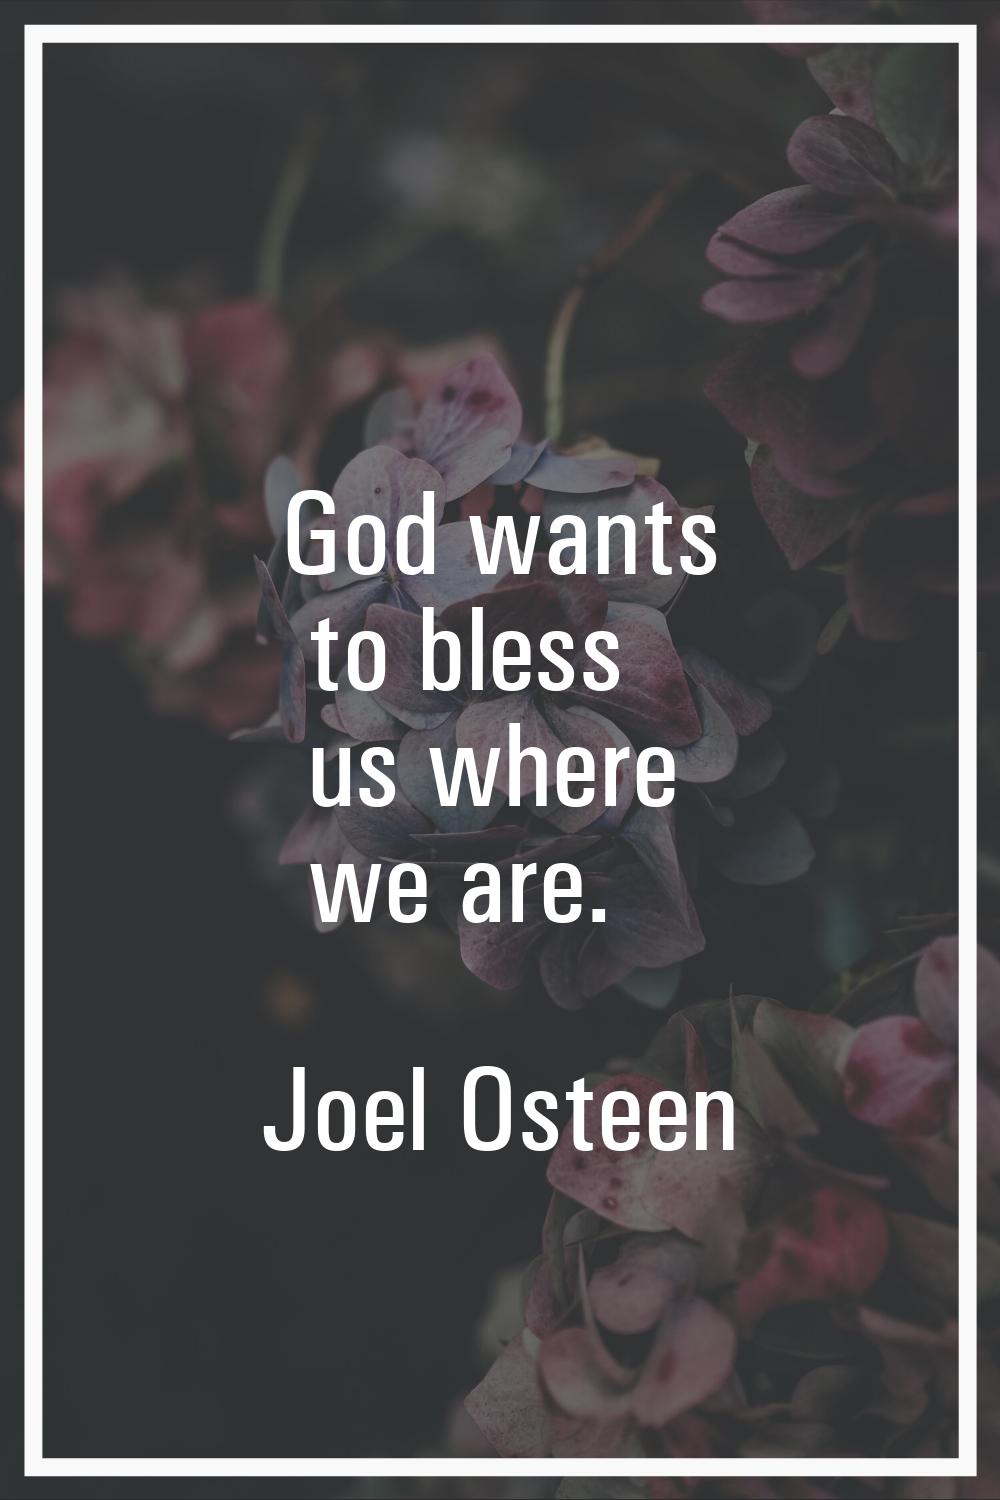 God wants to bless us where we are.